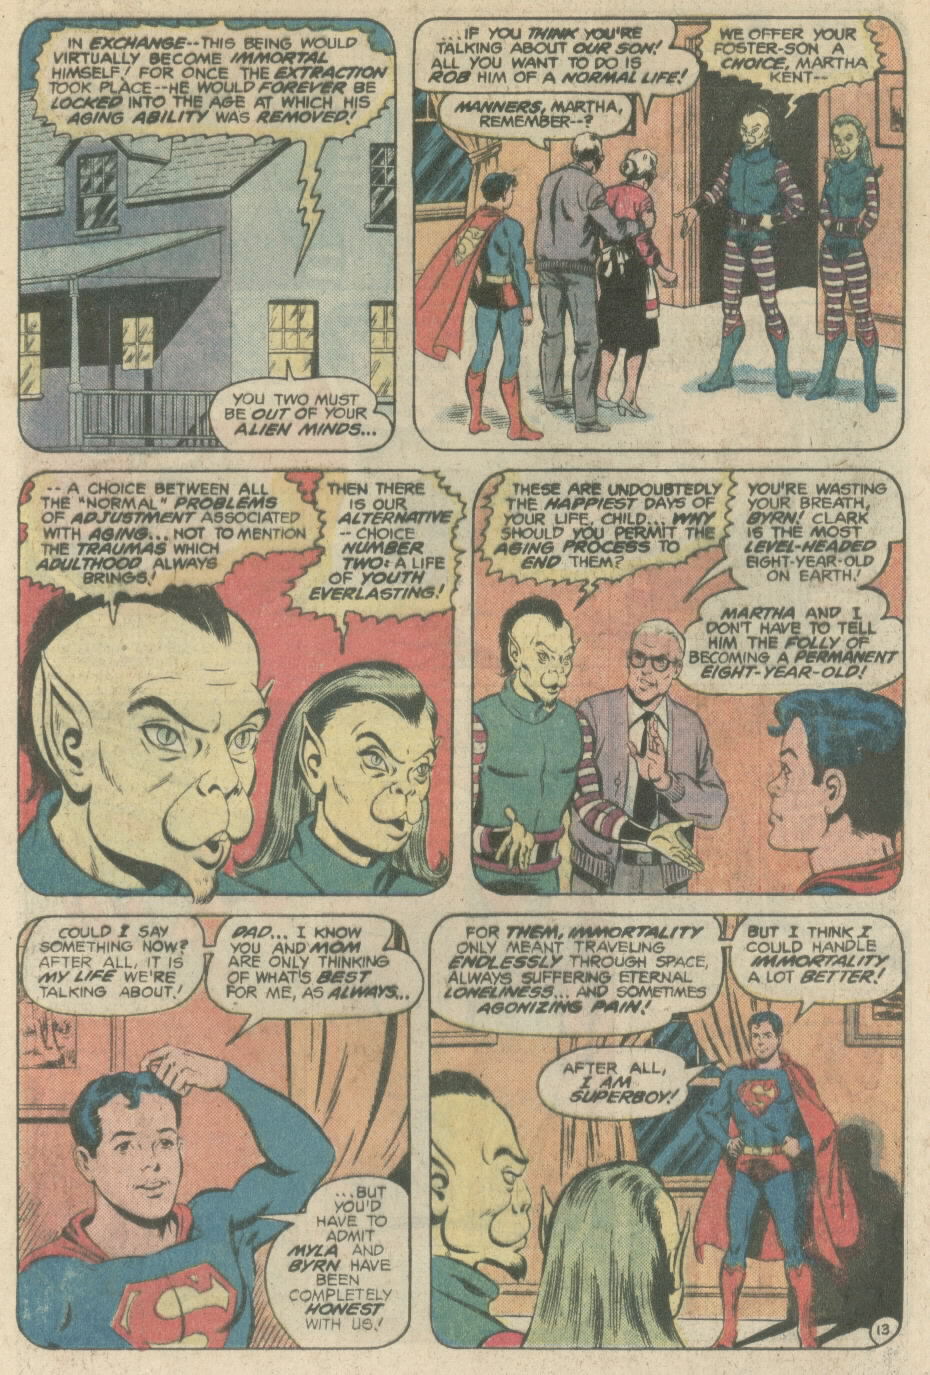 The New Adventures of Superboy 1 Page 13